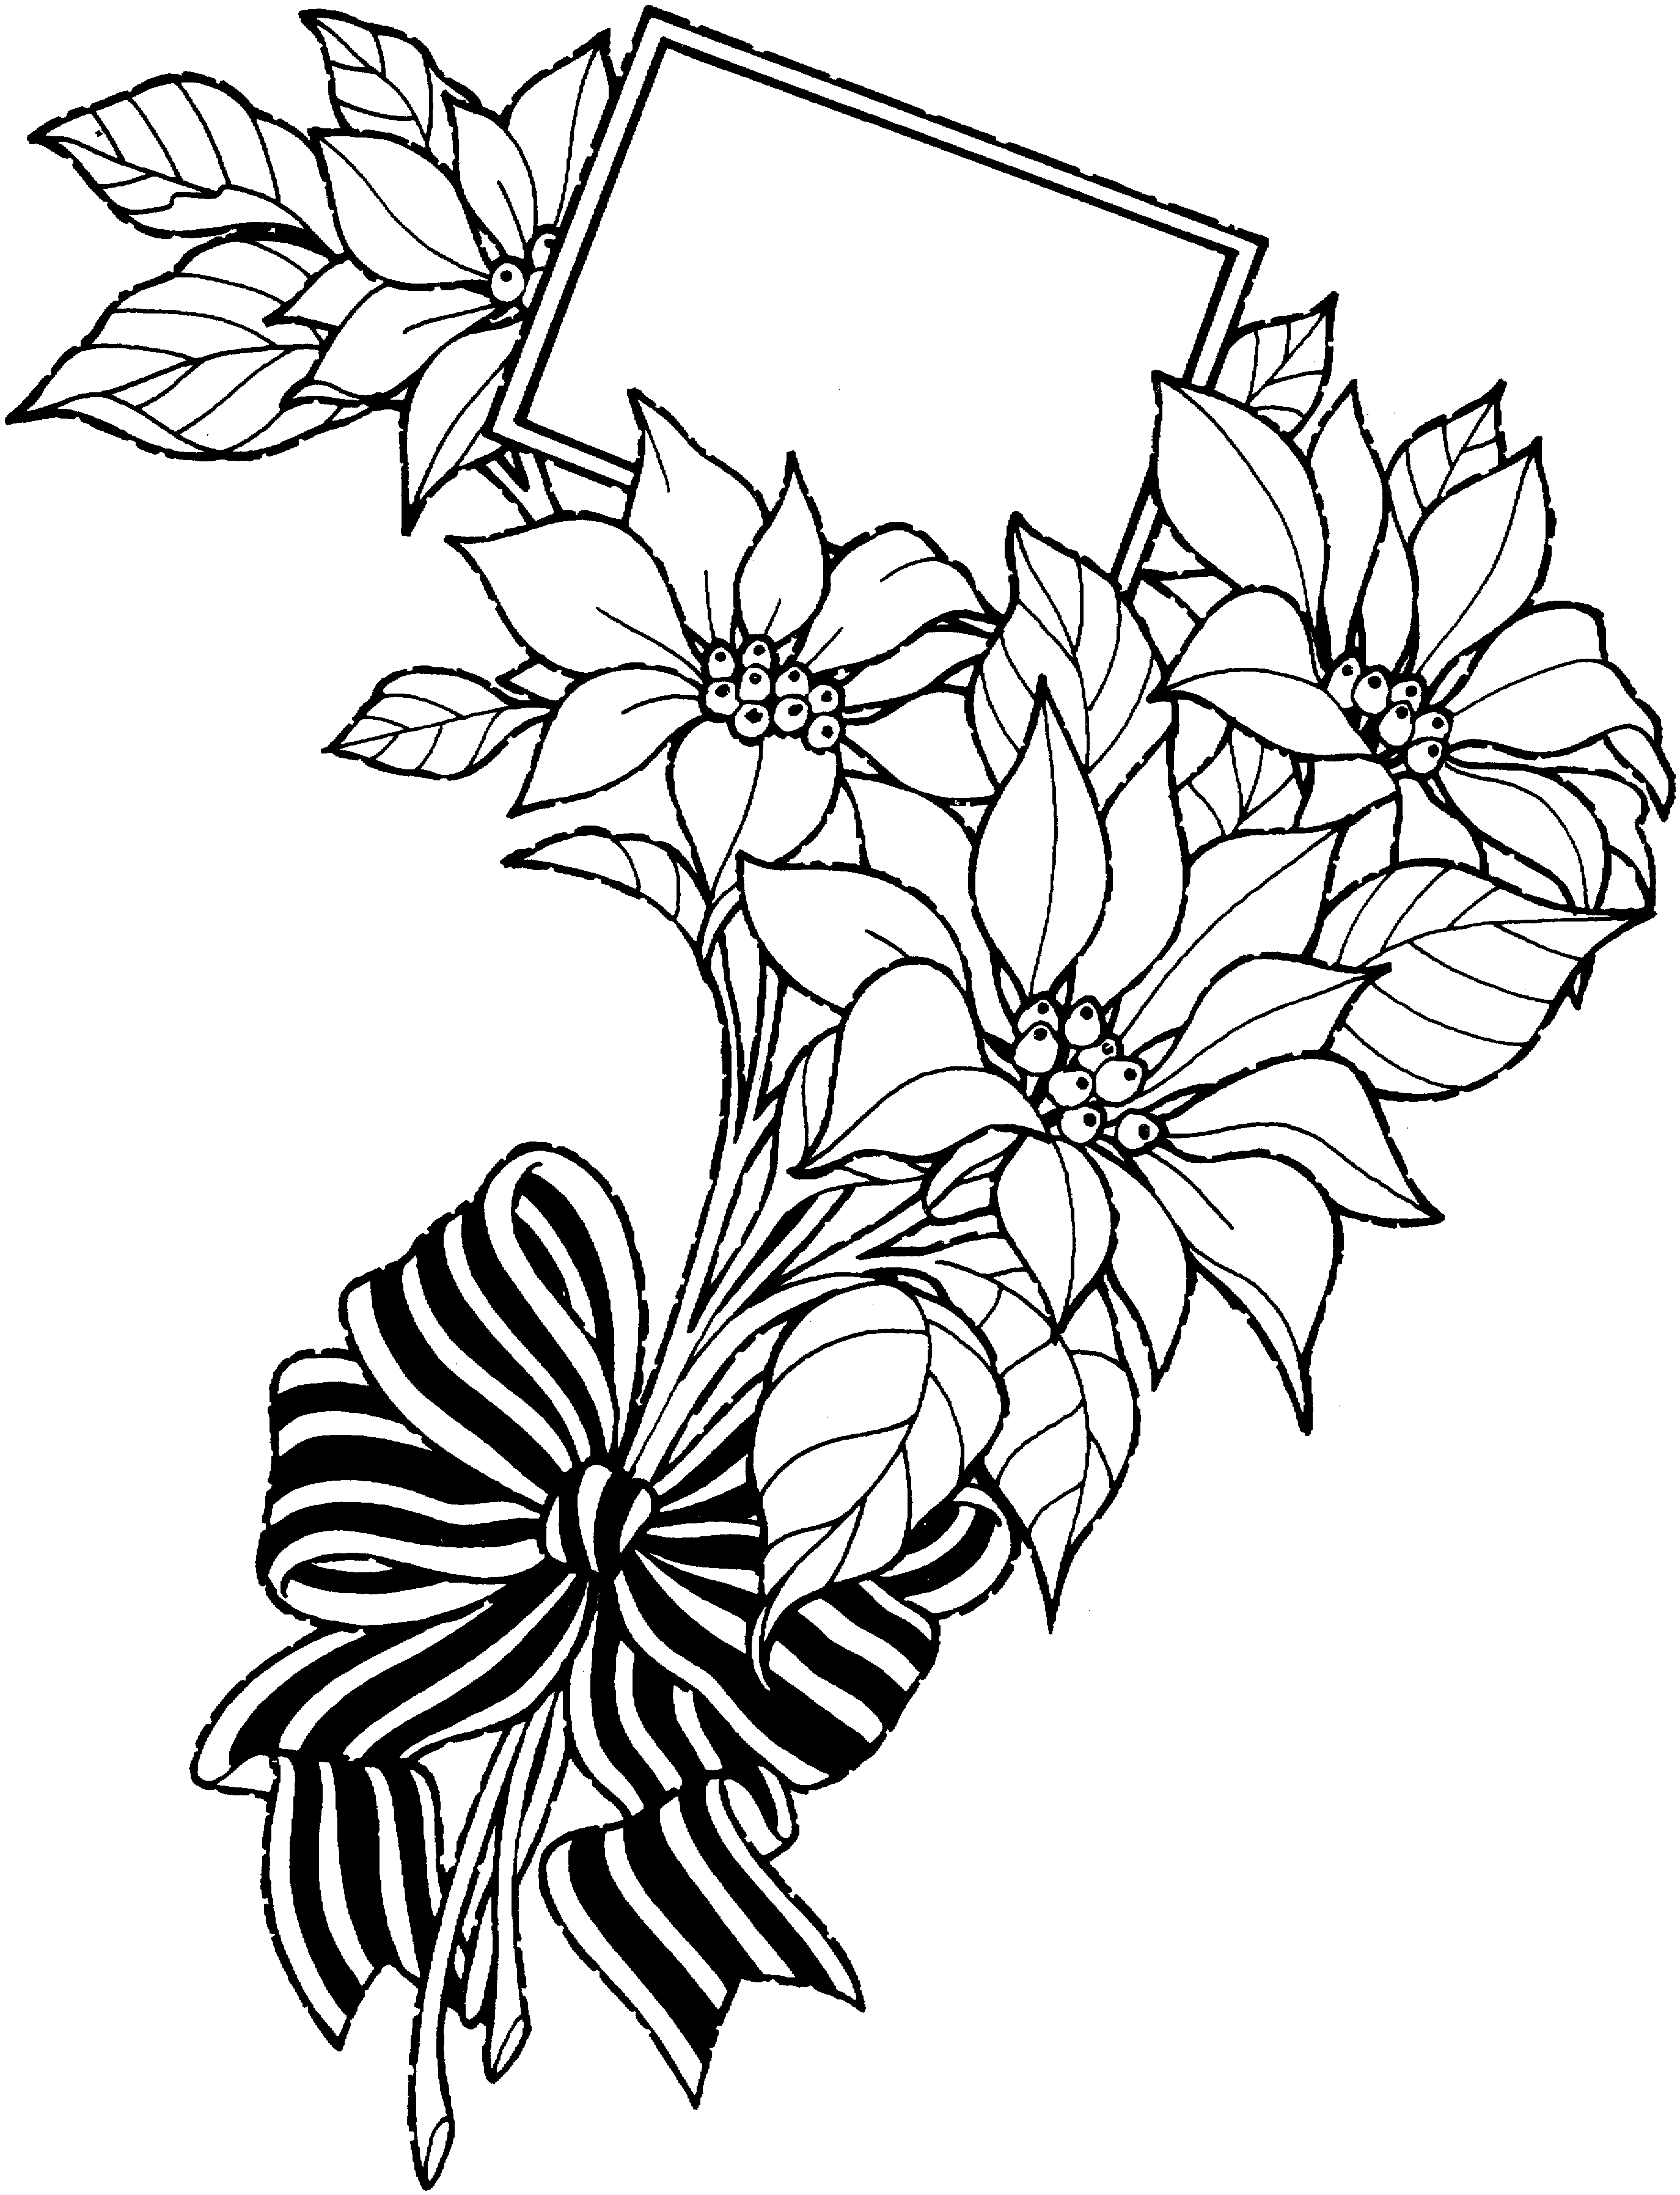 Bouquet Of Flowers Drawing - ClipArt Best